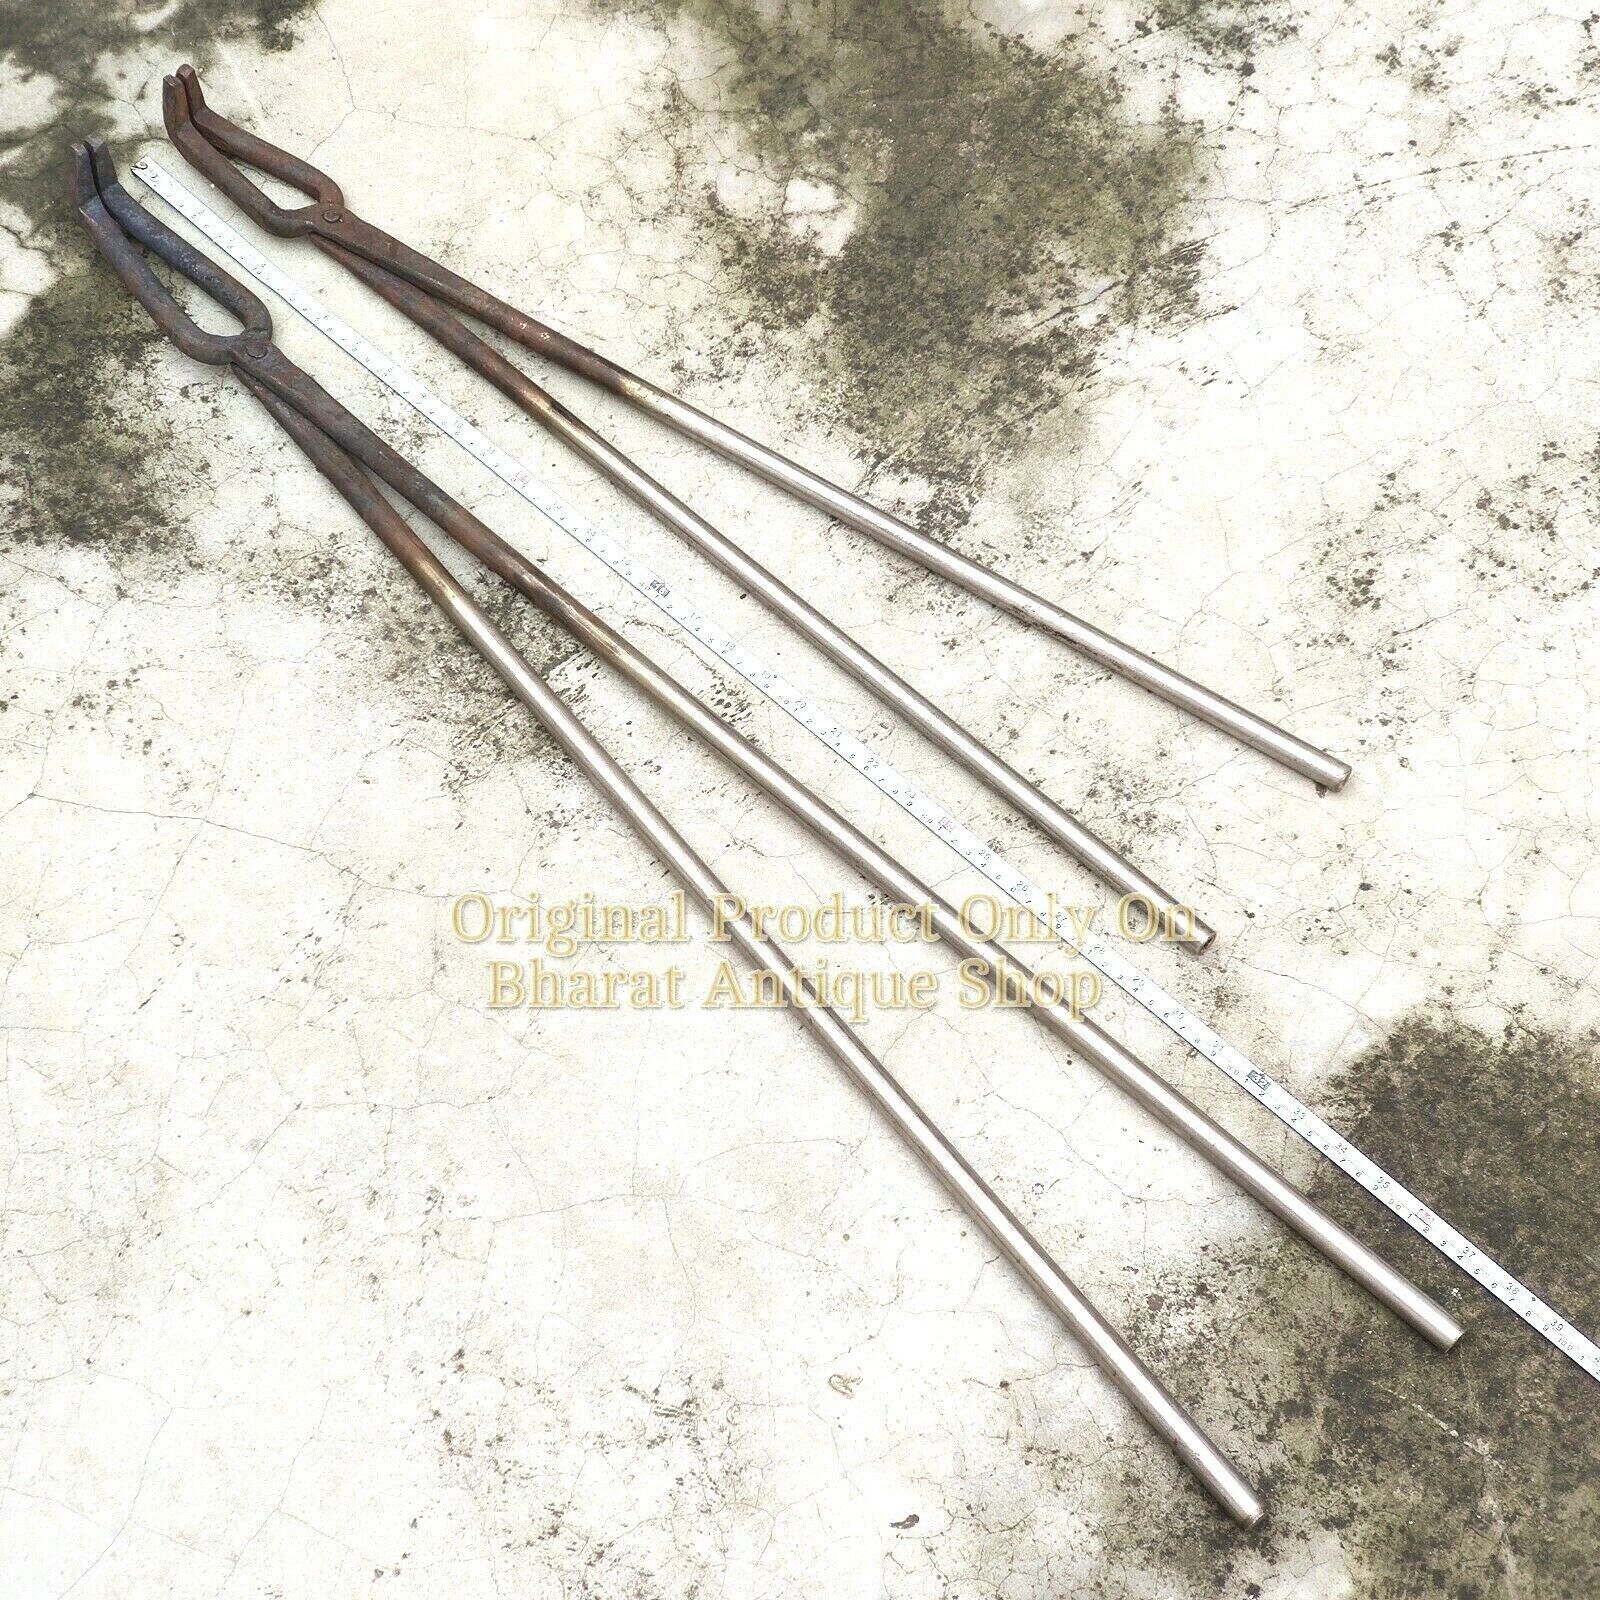 Blacksmith Tongs Set Of 2 Forge Hammer Anvil And Vise Tools